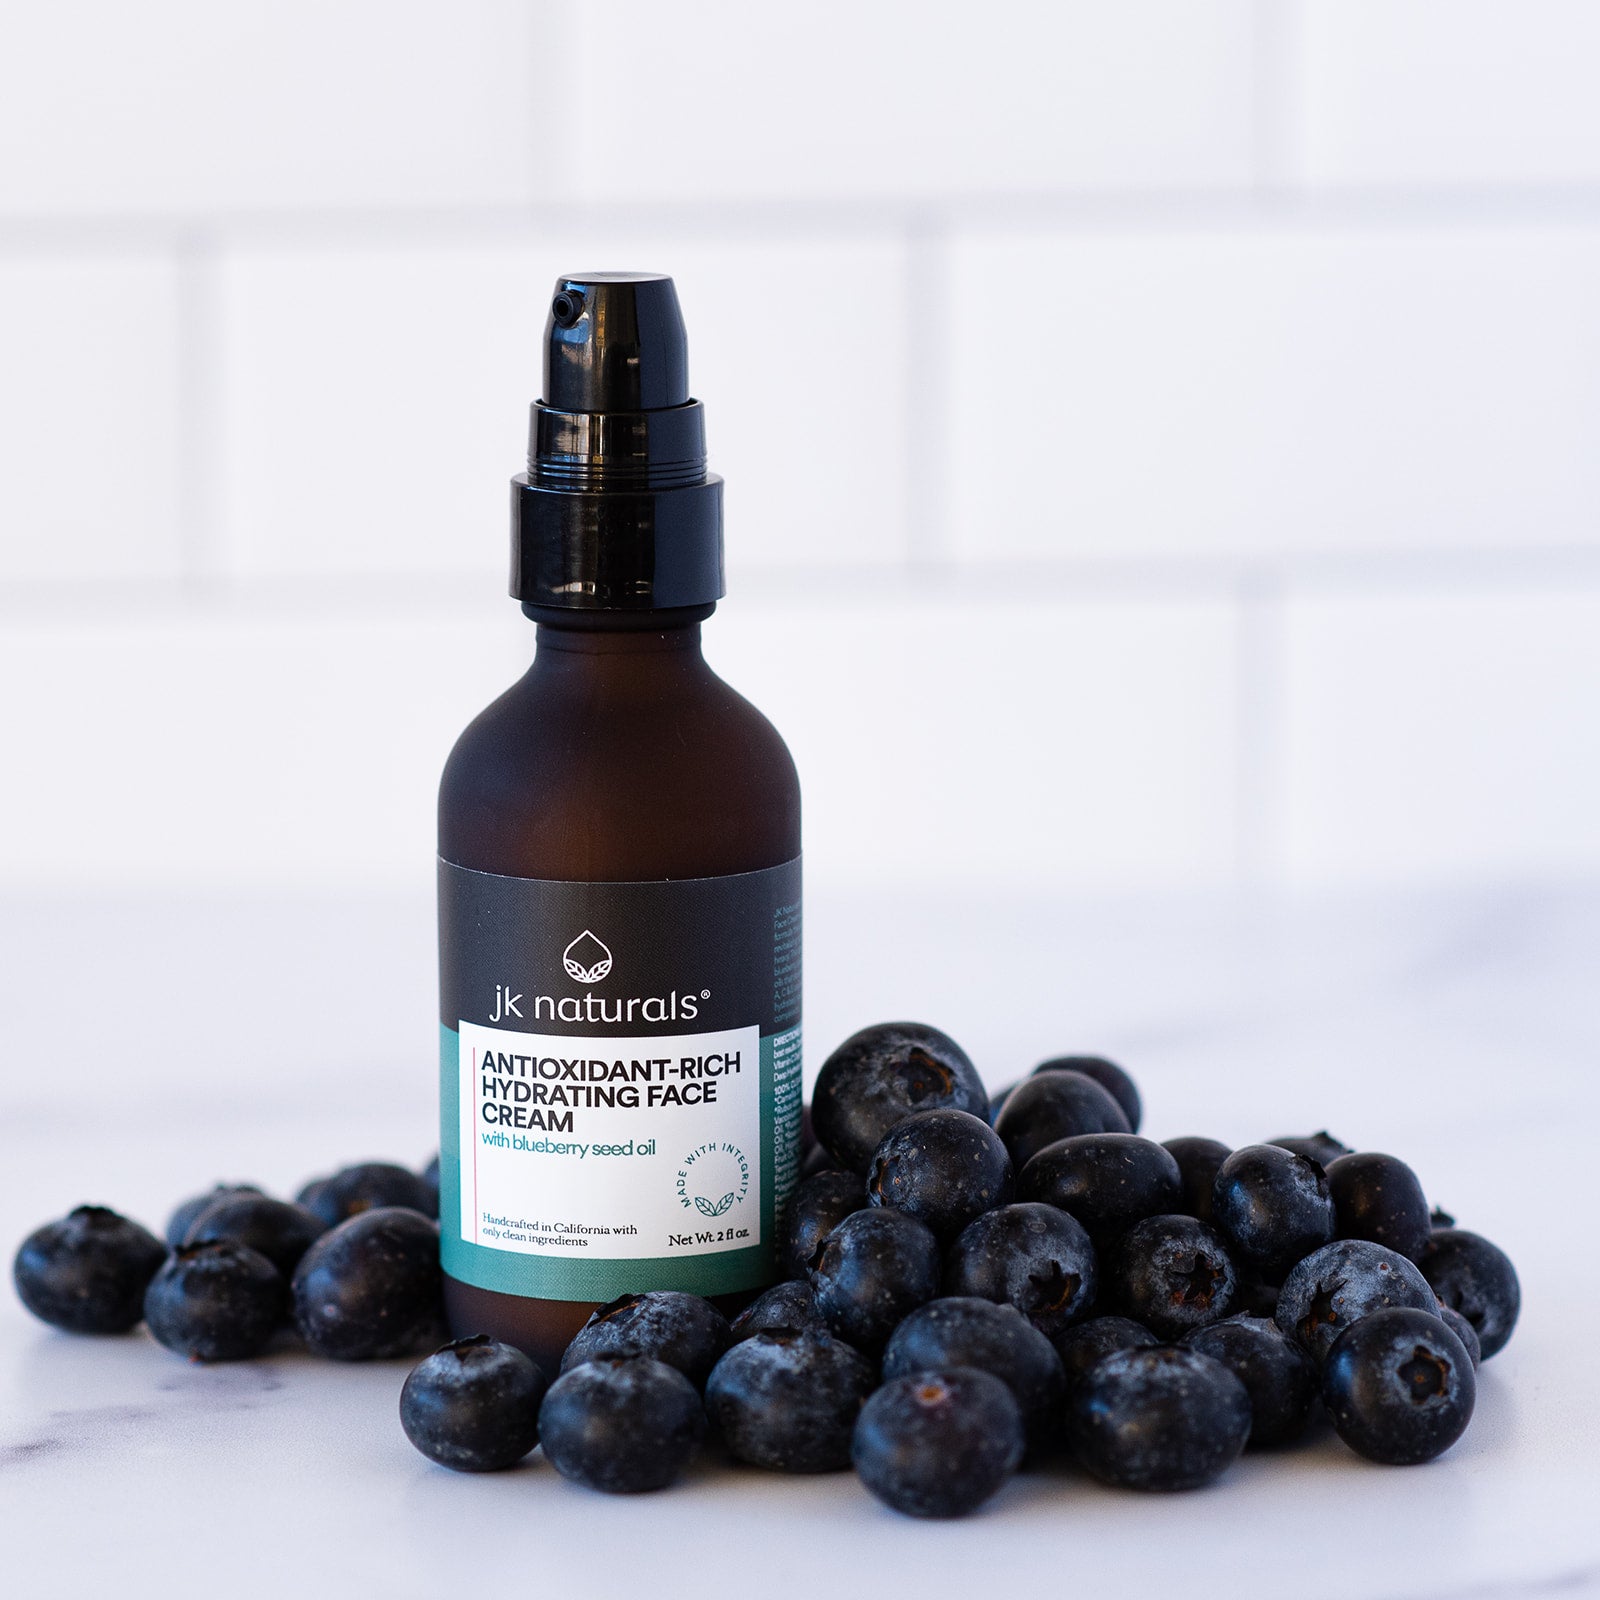 Antioxidant-Rich Hydrating Face Cream | with Blueberry Seed Oil